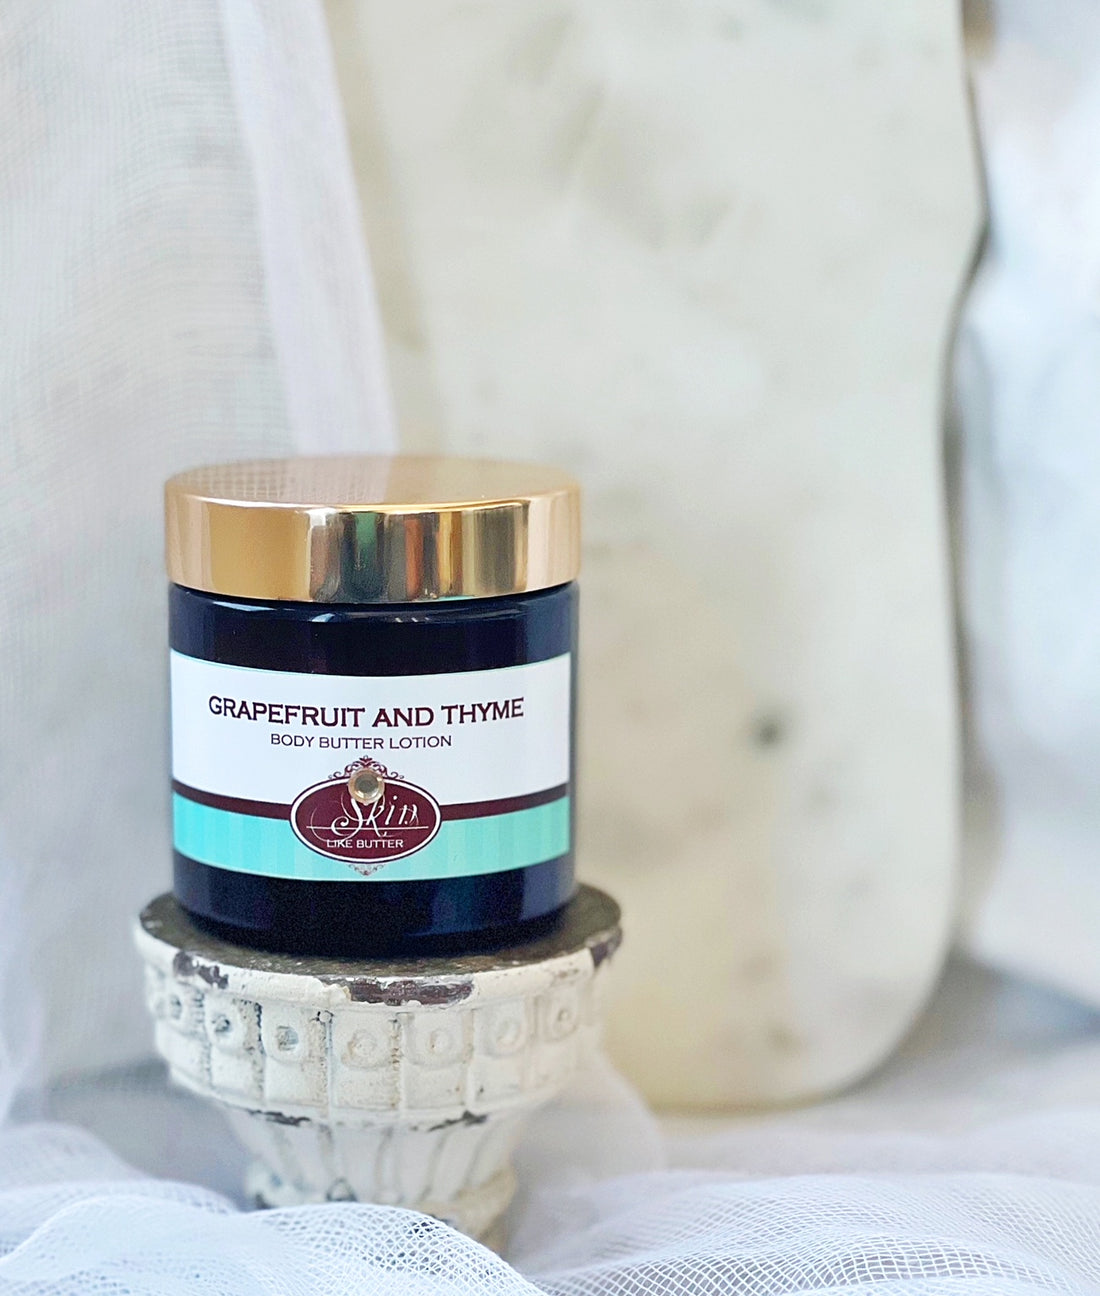 AMBER LAVENDER  scented Body Butter, waterfree and non-greasy, vegan